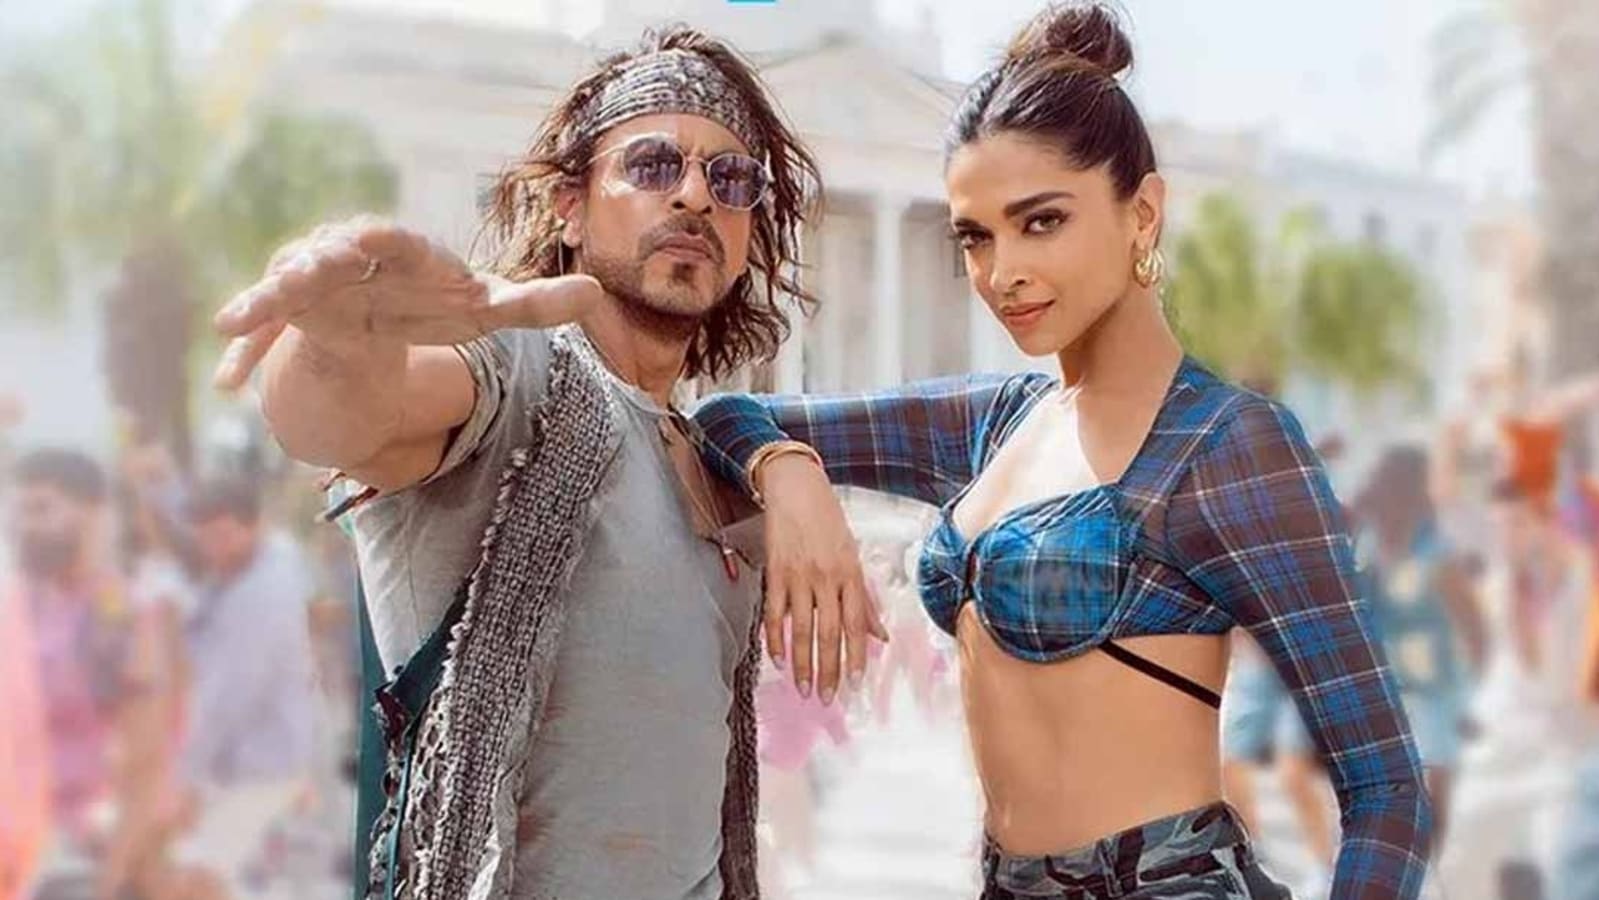 Shah Rukh Khan says Deepika Padukone has the sexiest fight scene in Pathaan Bollywood pic